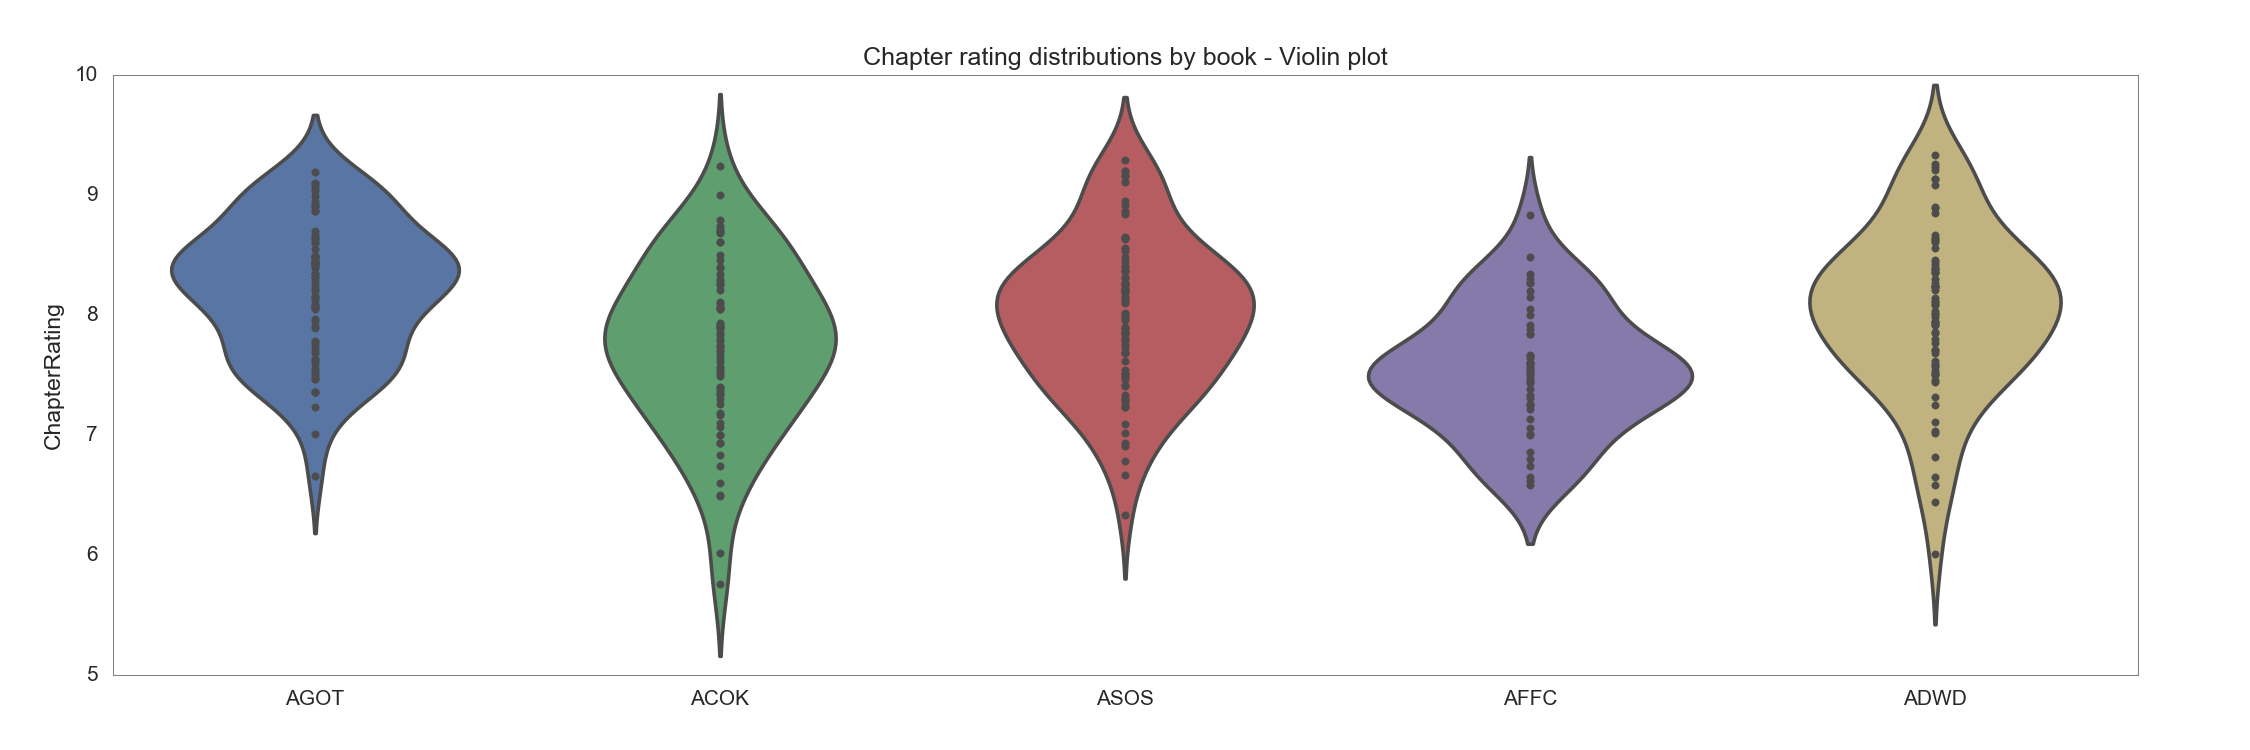 Chapter_rating_distributions_by_book_-_violin.png